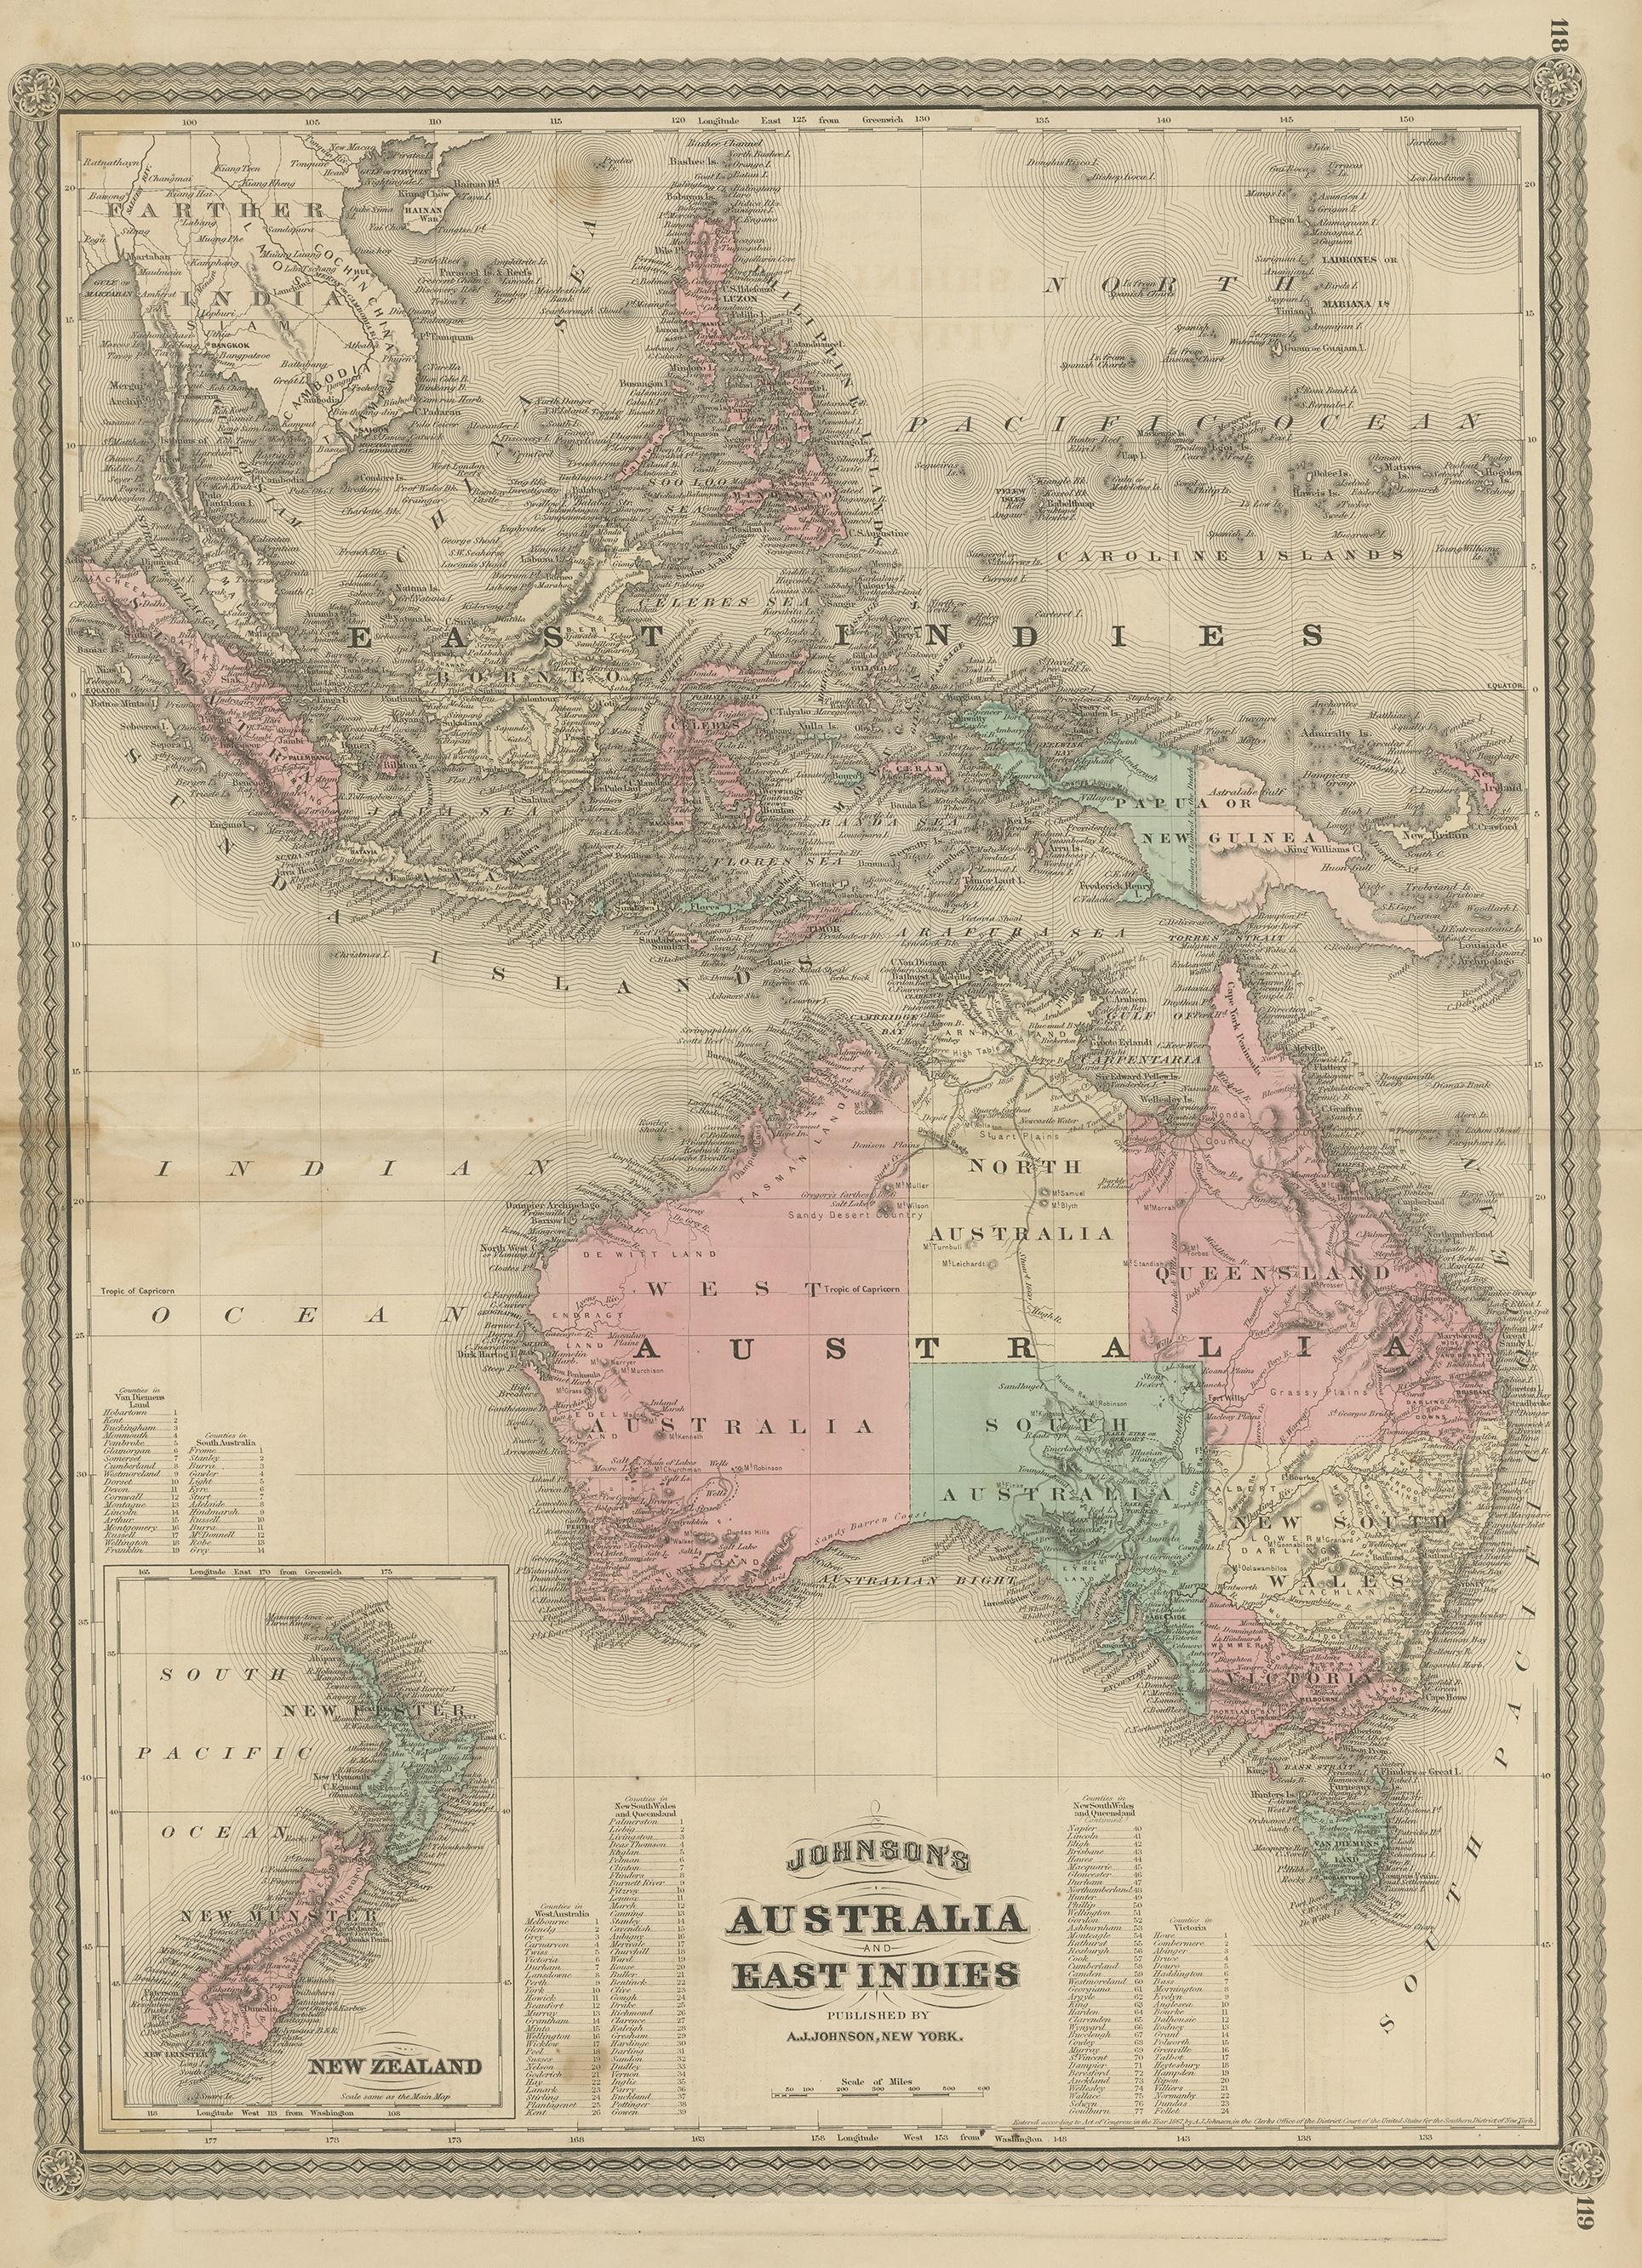 Antique map titled 'Johnson's Australia and East Indies'. Original map of Australia and the East Indies, with an inset map of New Zealand. This map originates from 'Johnson's New Illustrated Family Atlas of the World' by A.J. Johnson. Published 1872.